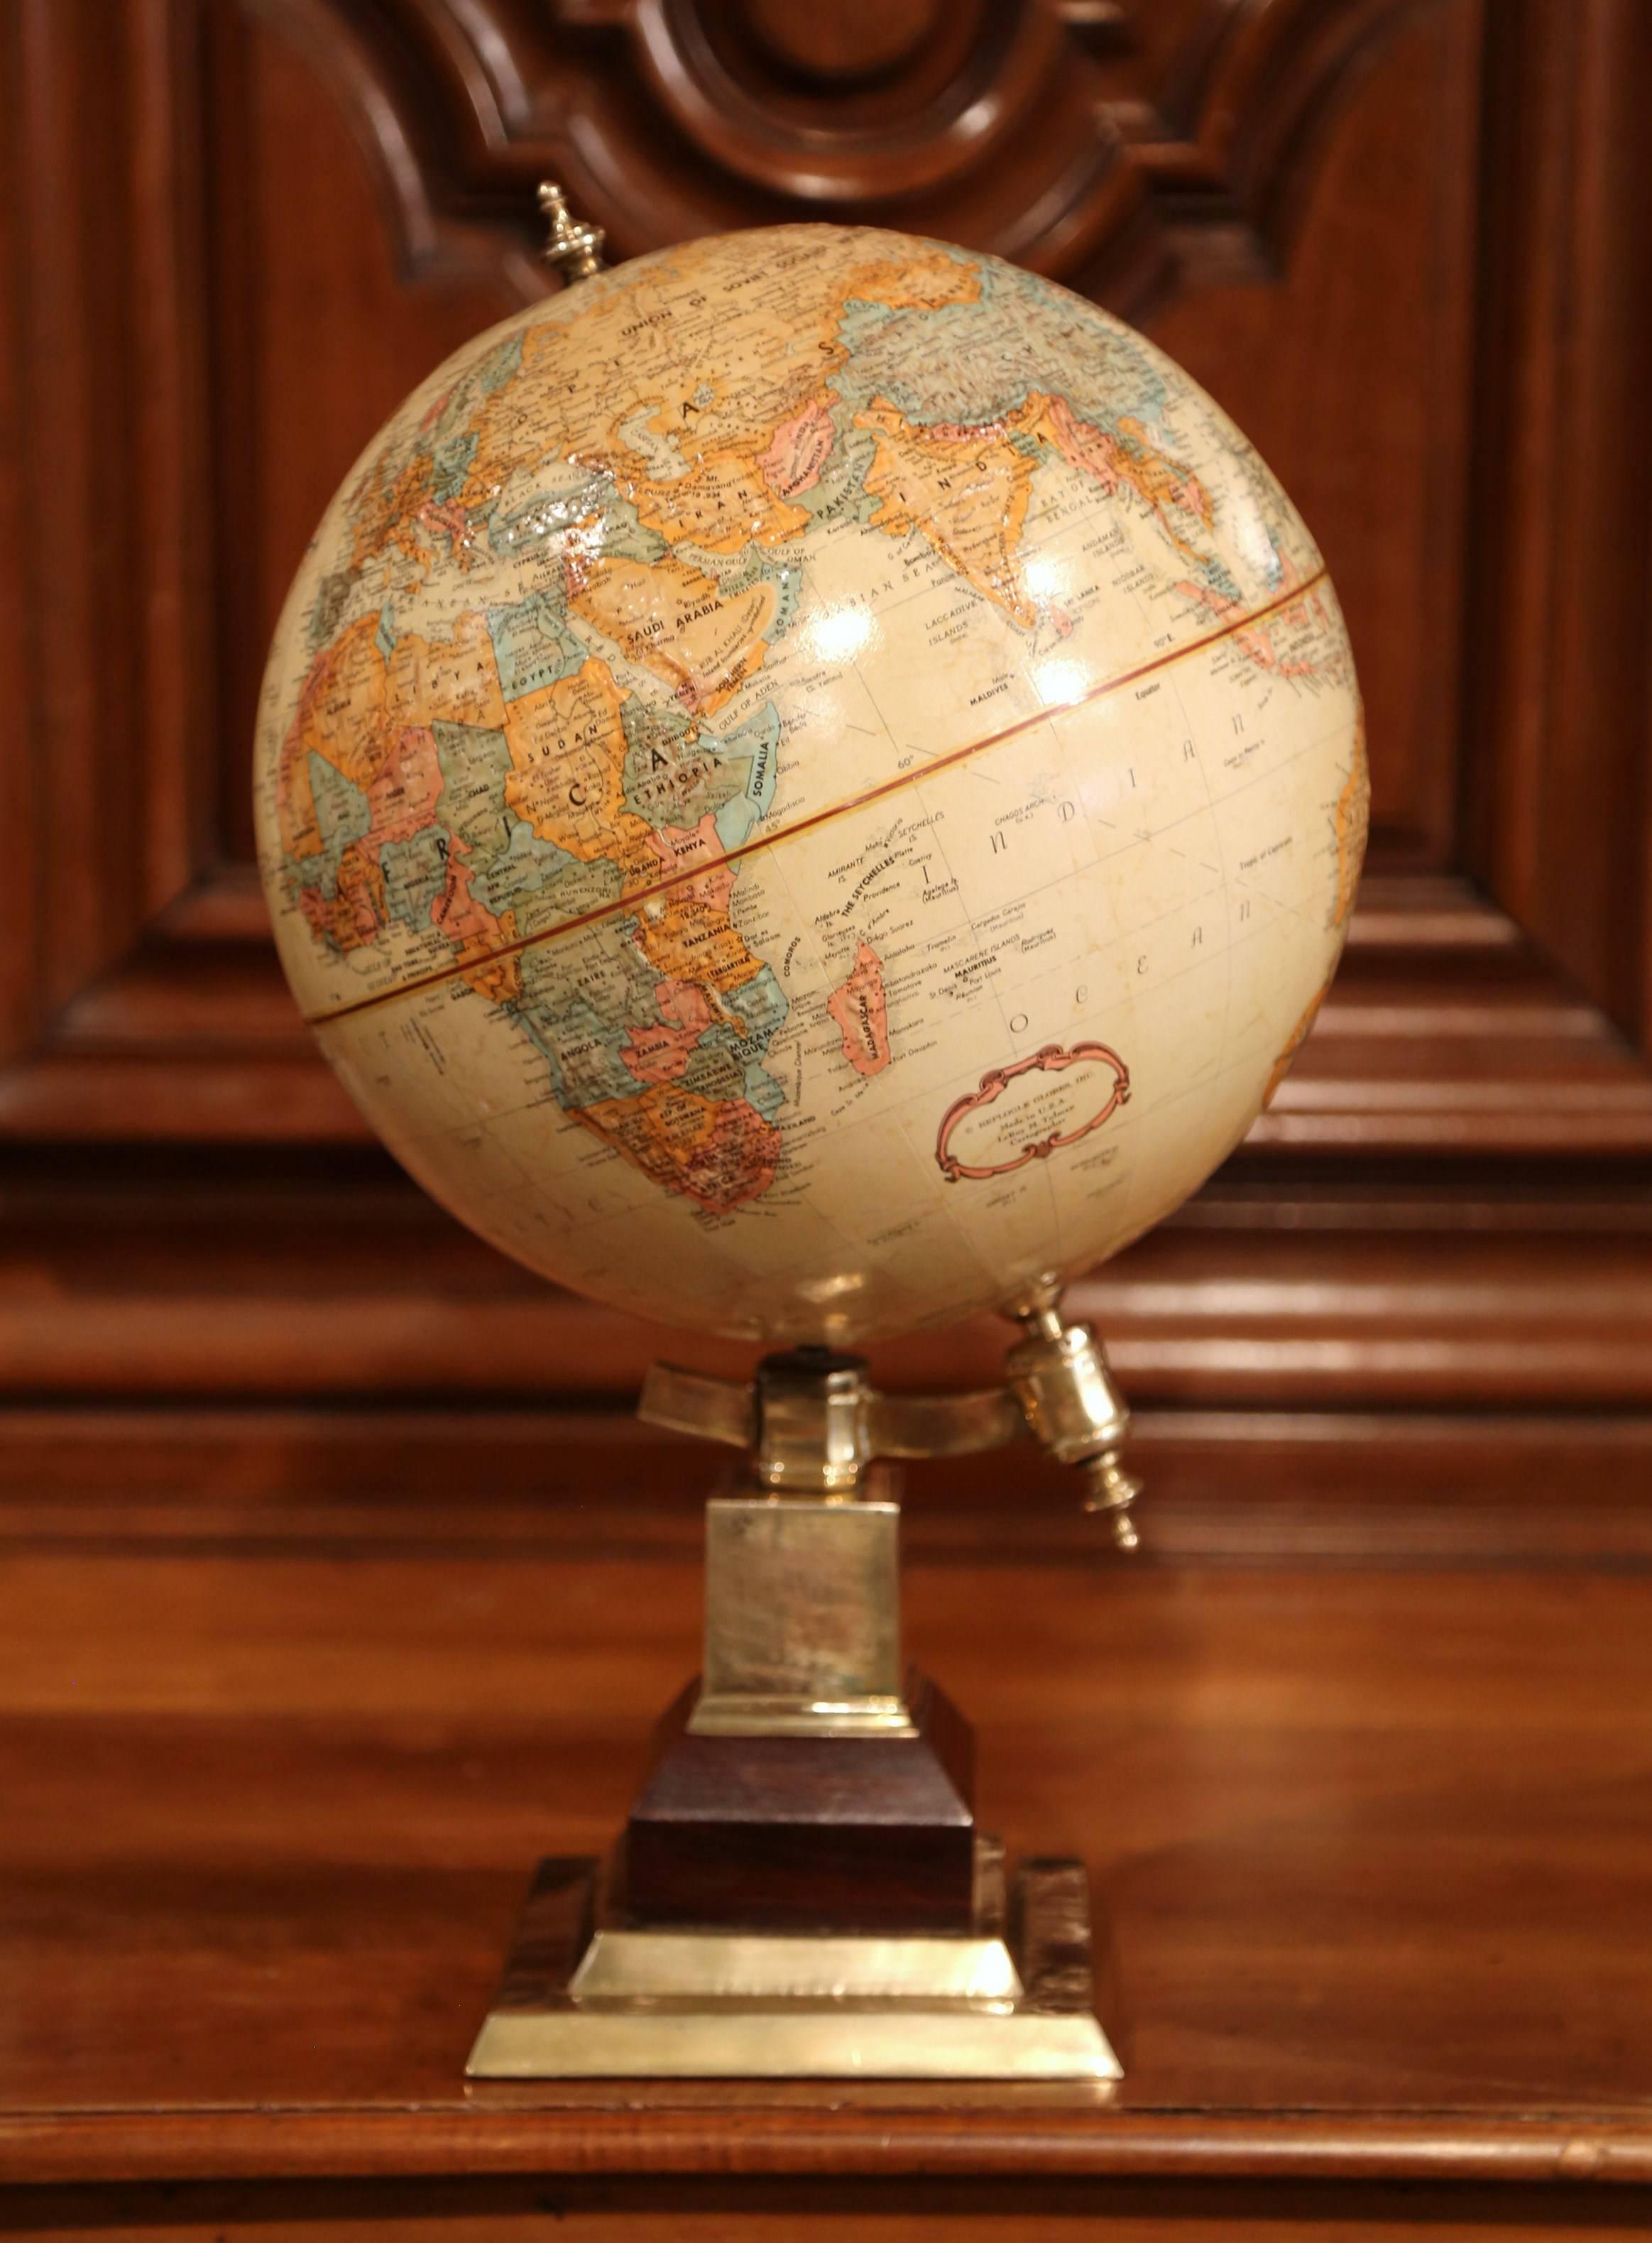 This beautifully preserved, vintage globe was crafted in the USA, circa 1980 (1984 – Upper Volta changes name to Burkina Faso). Sitting on a patinated brass base, this terrestrial globe has a very detailed map in relief, in a muted, neutral palette